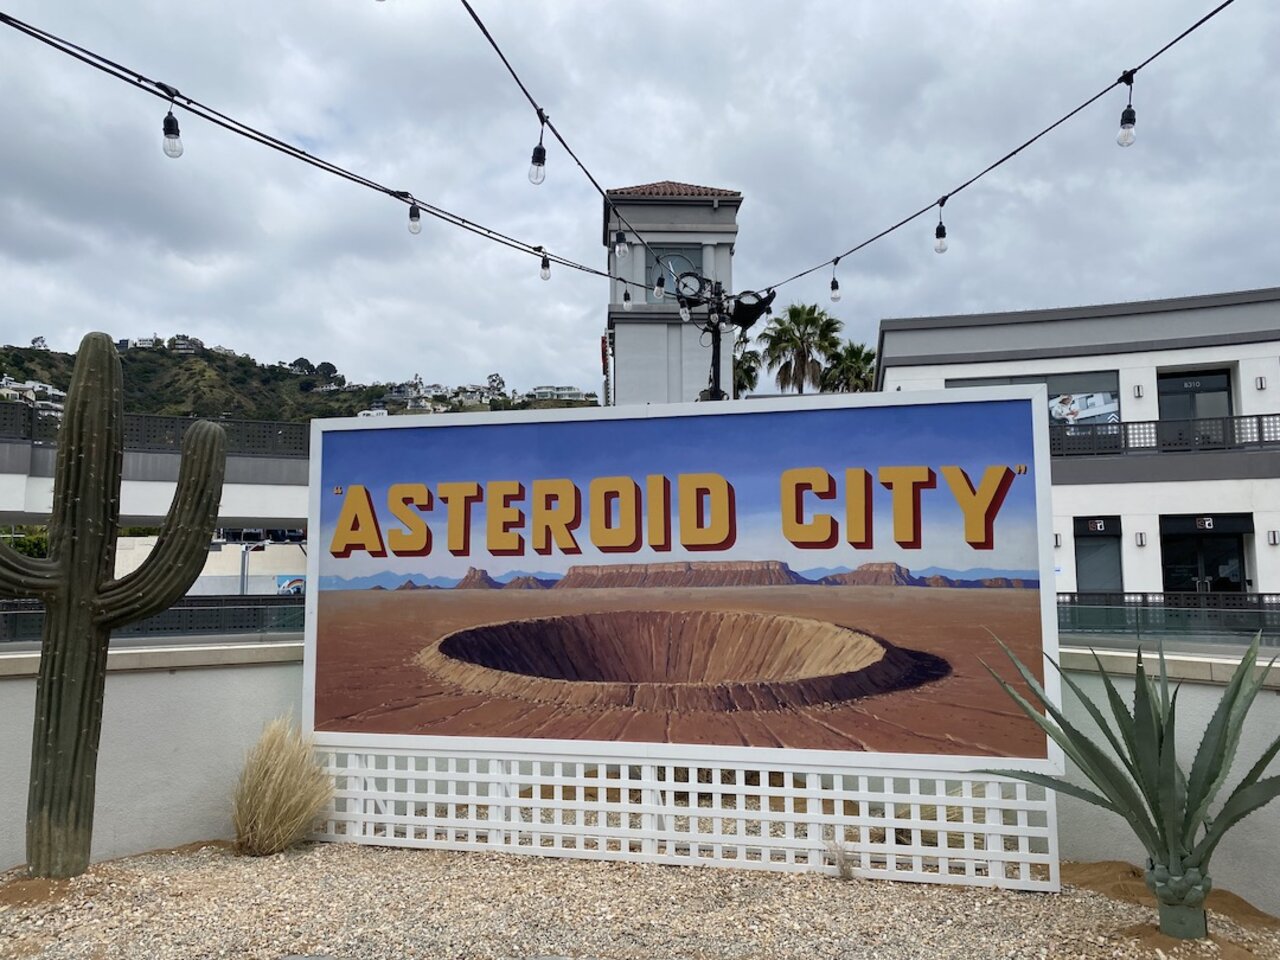 Asteroid City streaming: where to watch online?